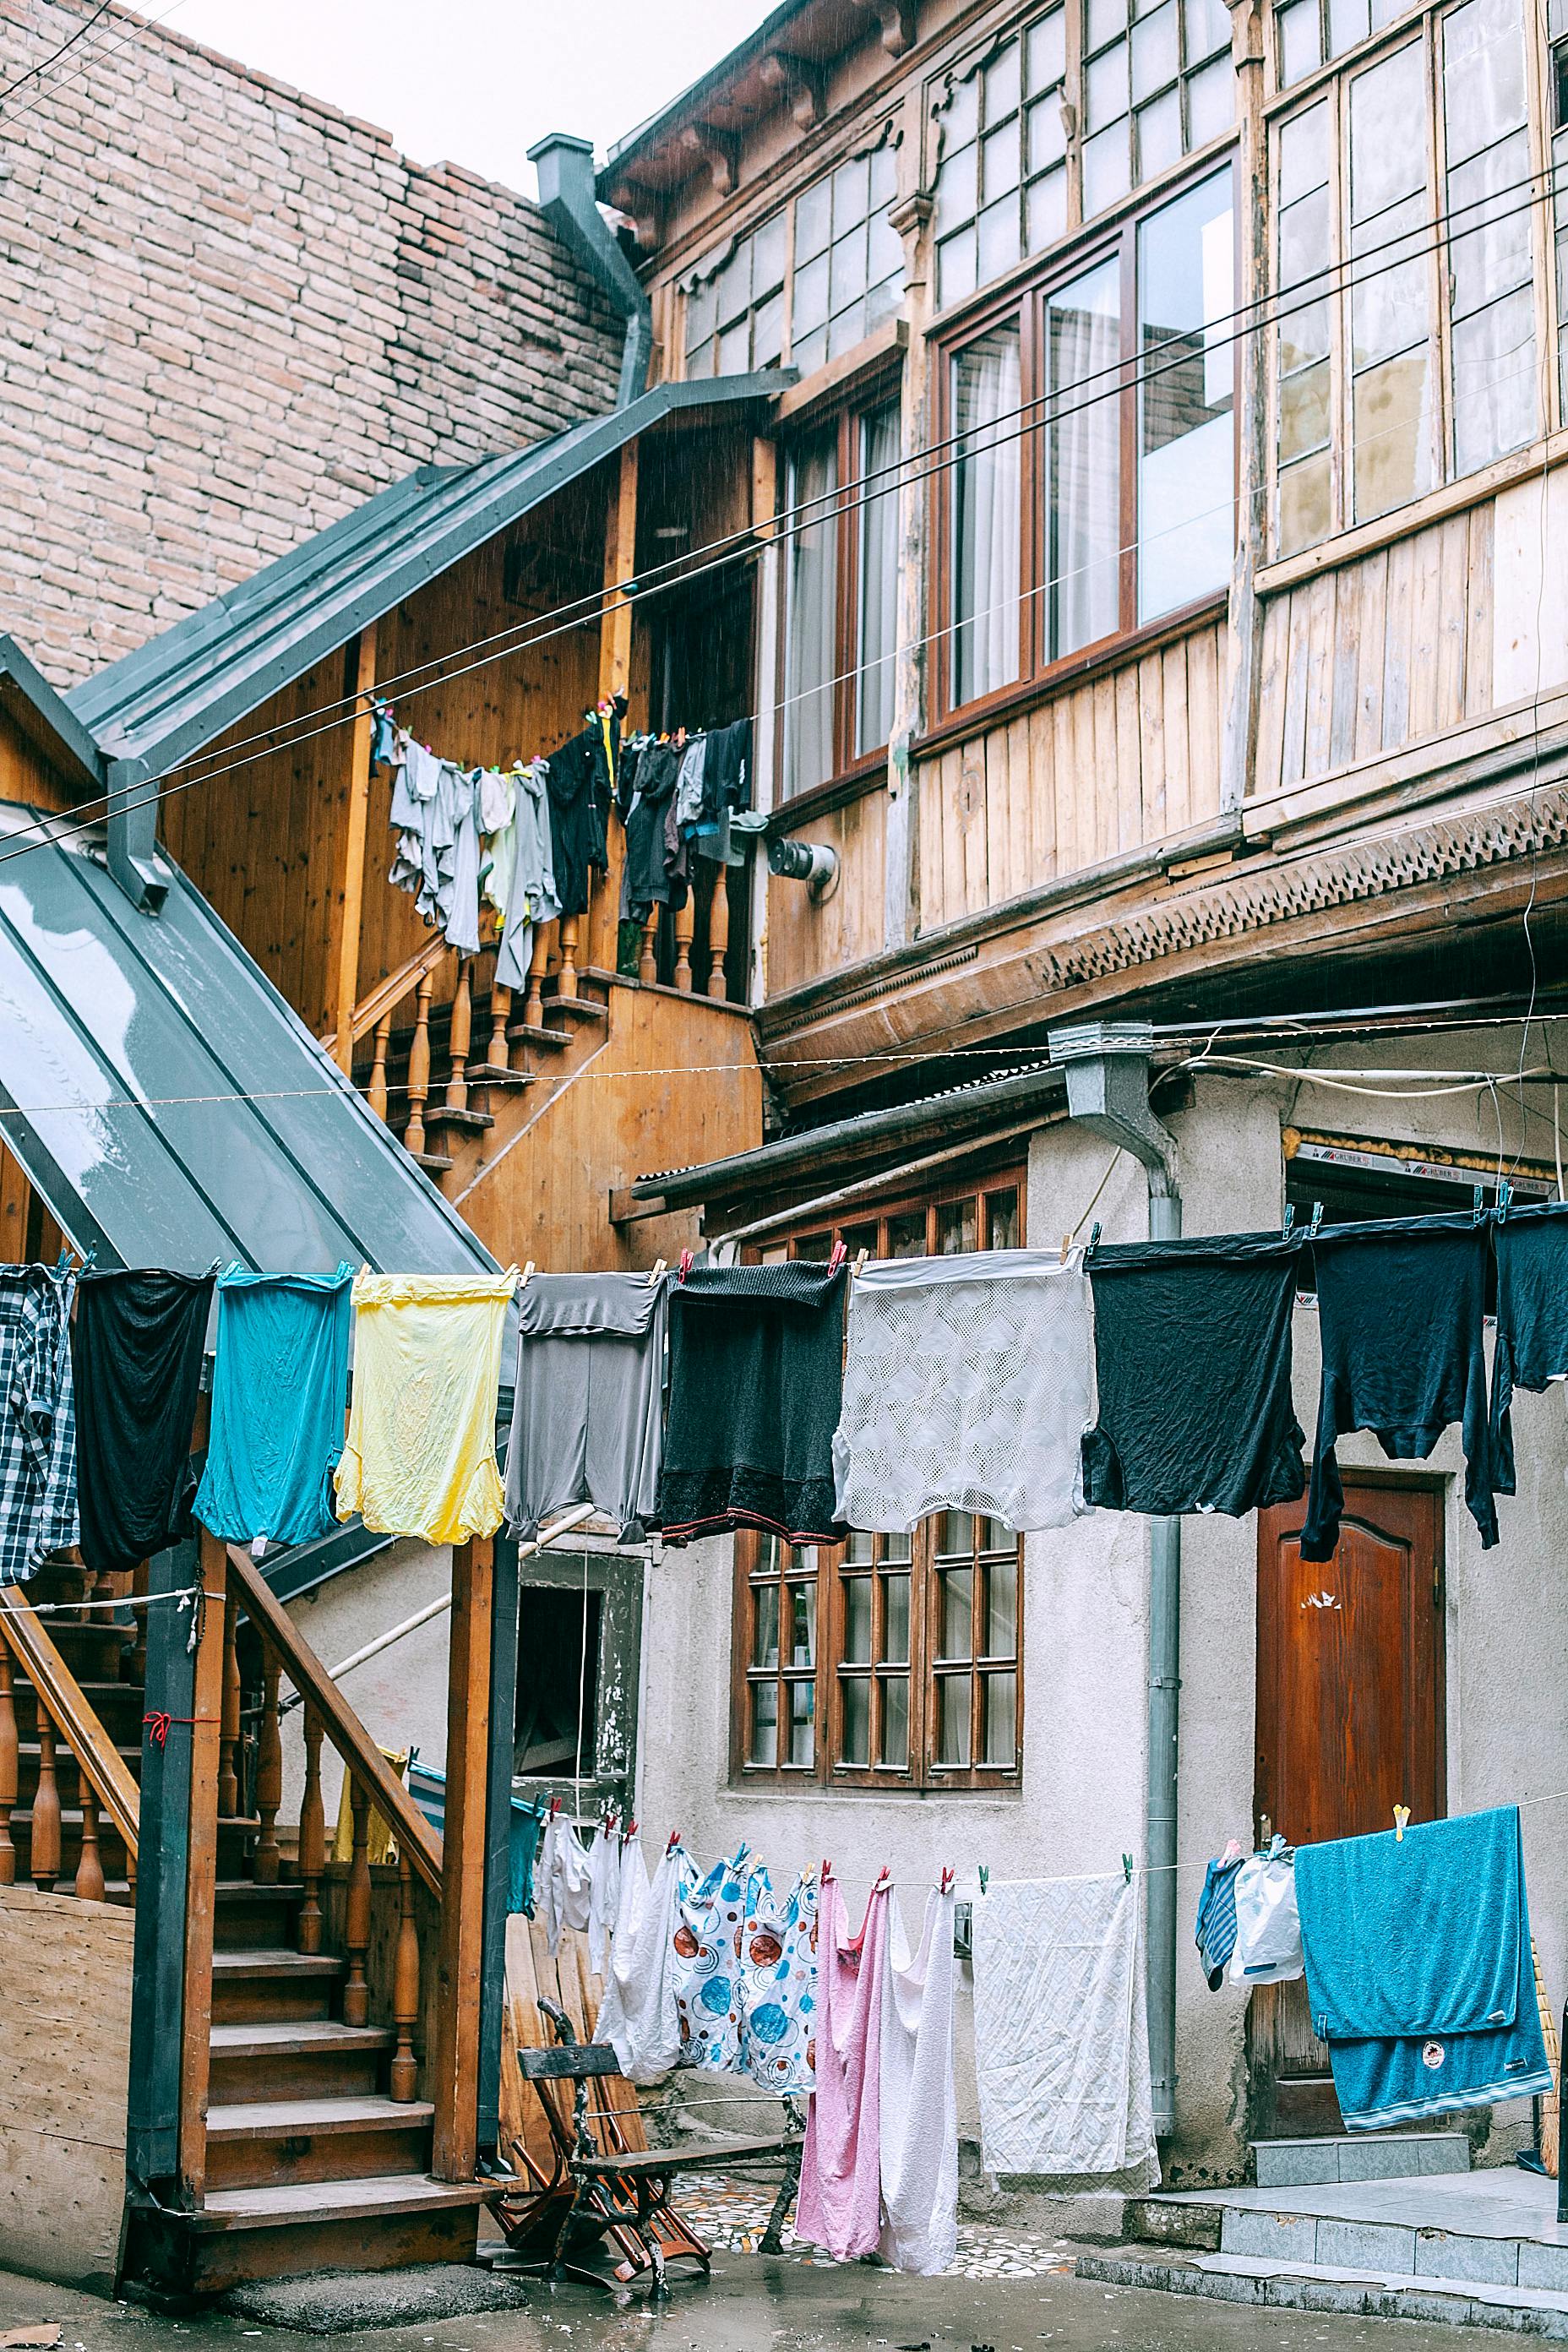 Laundry drying on clothesline outside shabby poor house